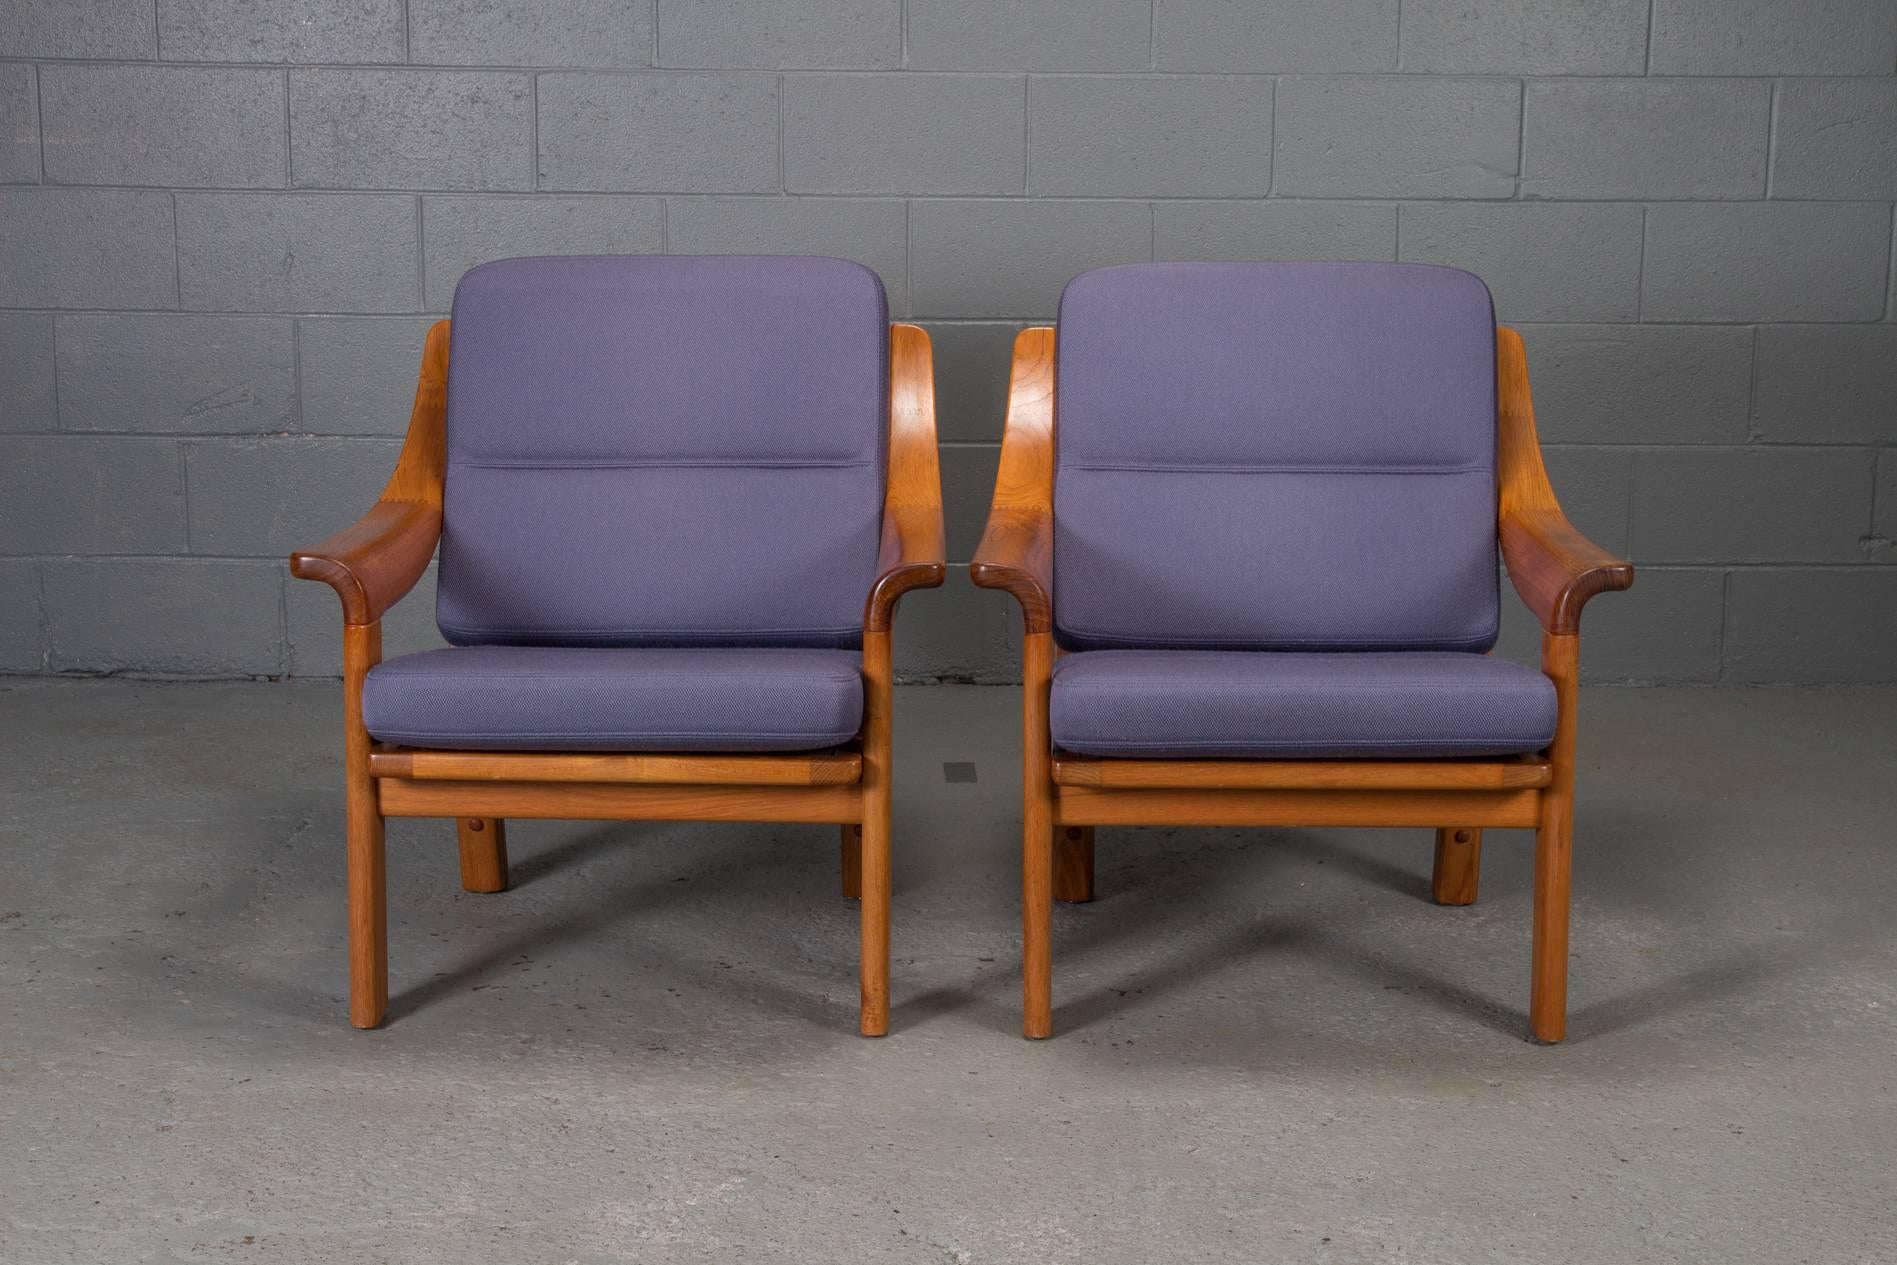 Pair of armchairs with finger joint arms by PJ Danmark. Sturdy, heavy frames and loose cushions.